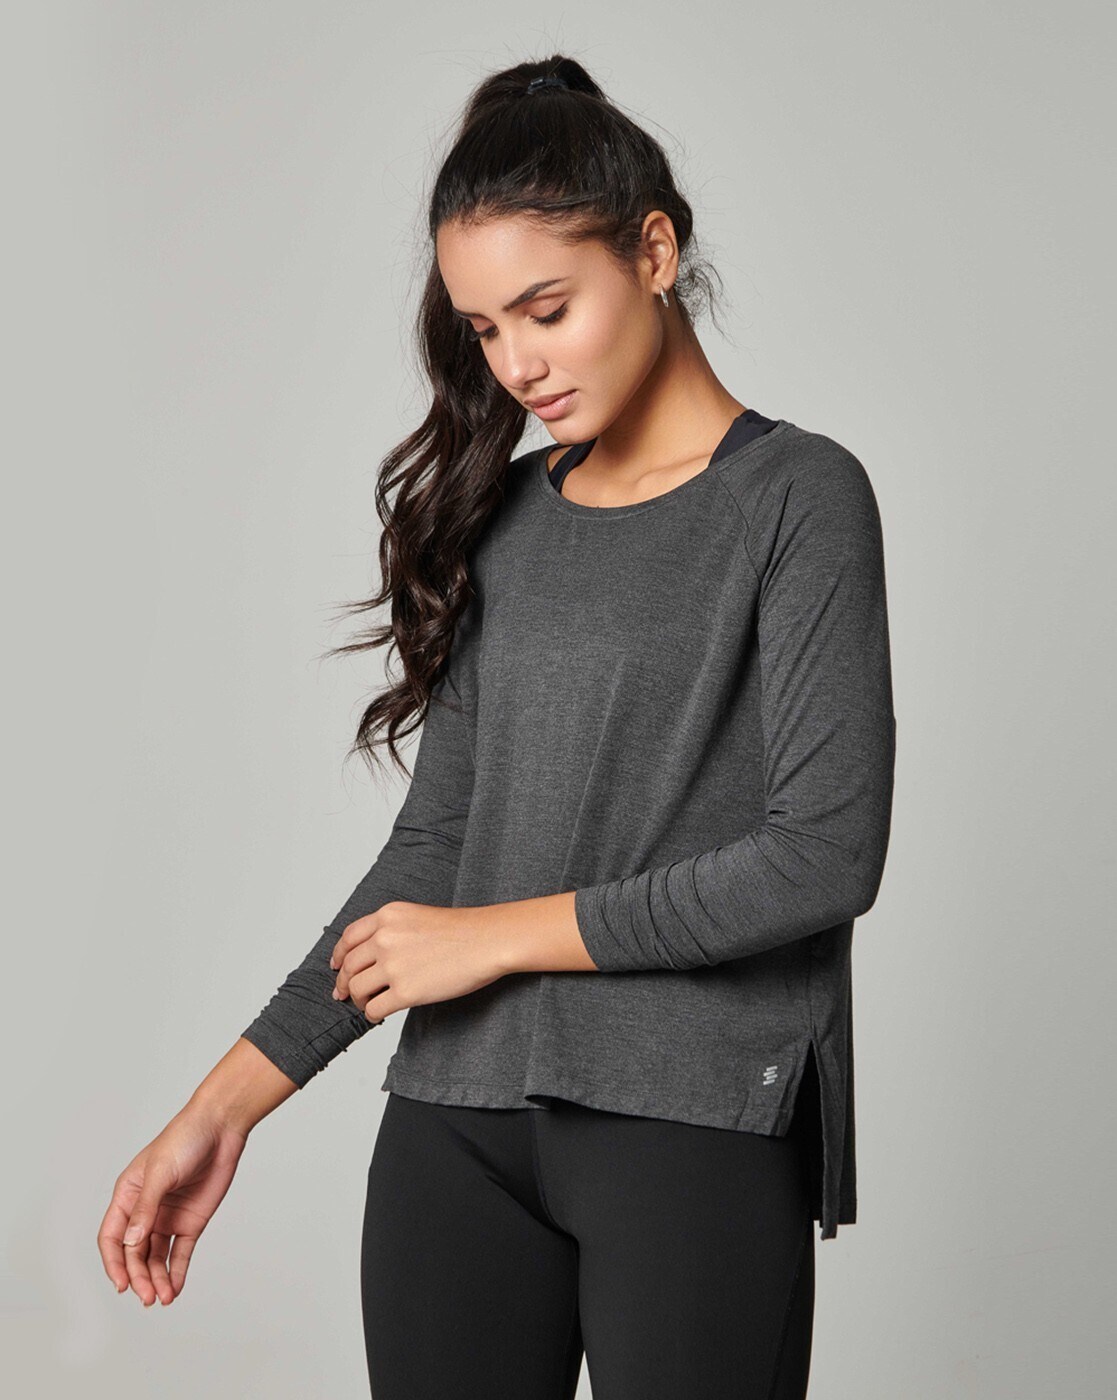 Relaxed Fit Sports Top with Round Neck